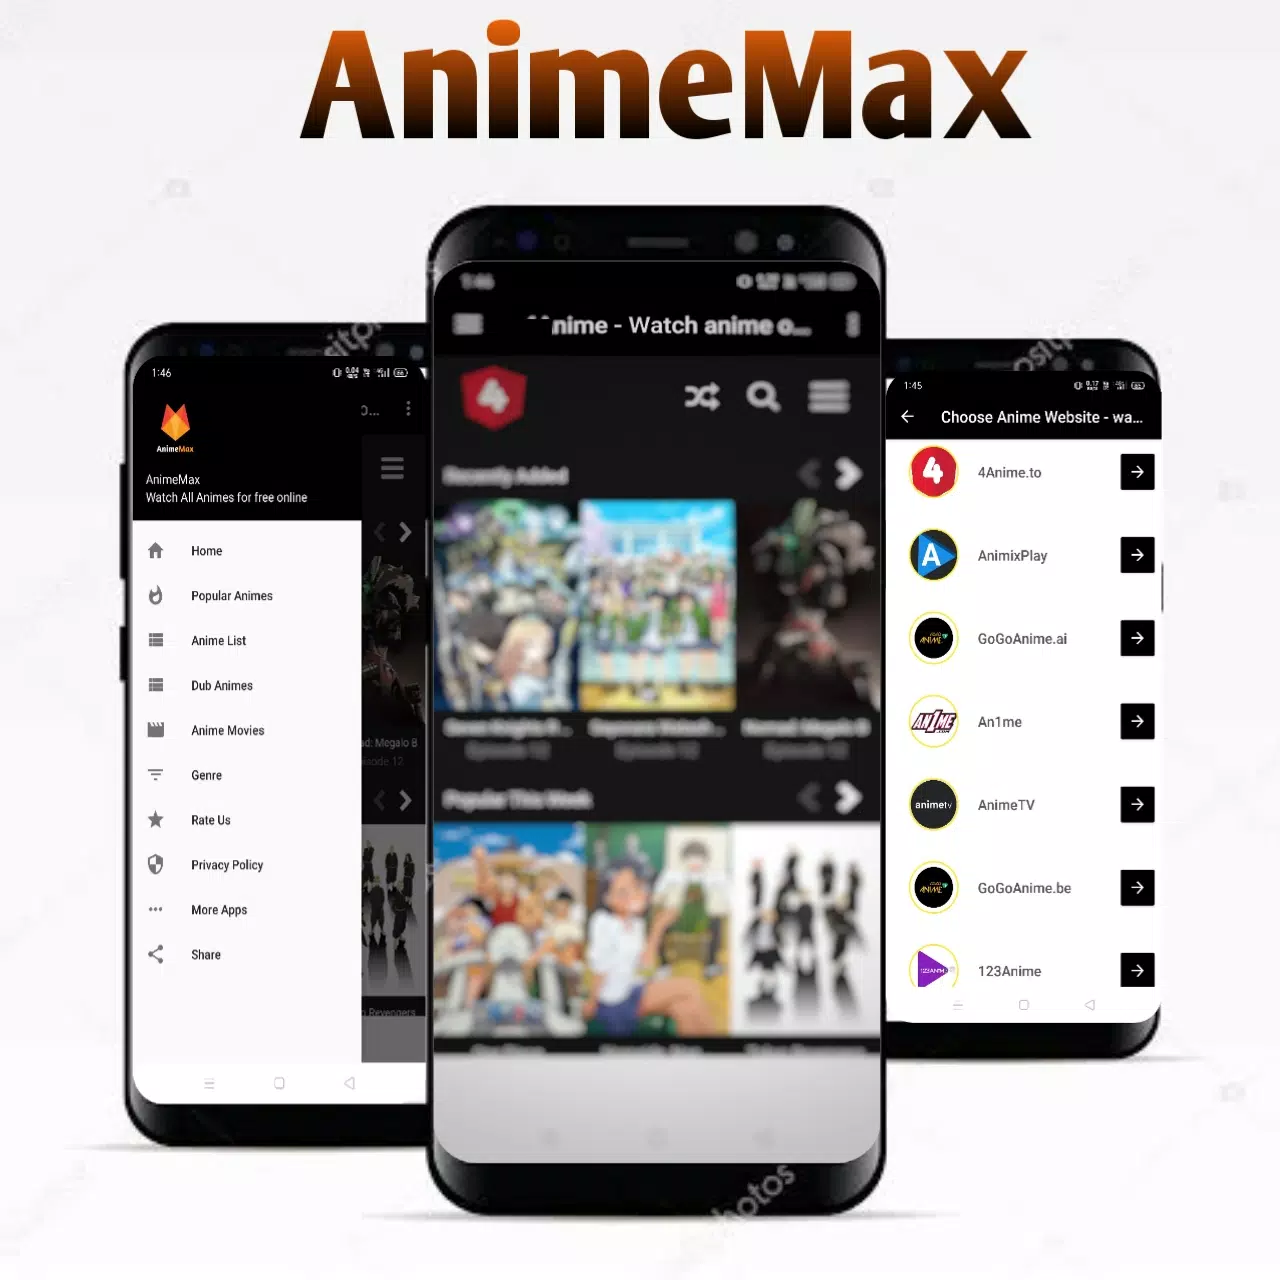 Watch Free Anime HD APK (Android App) - Free Download